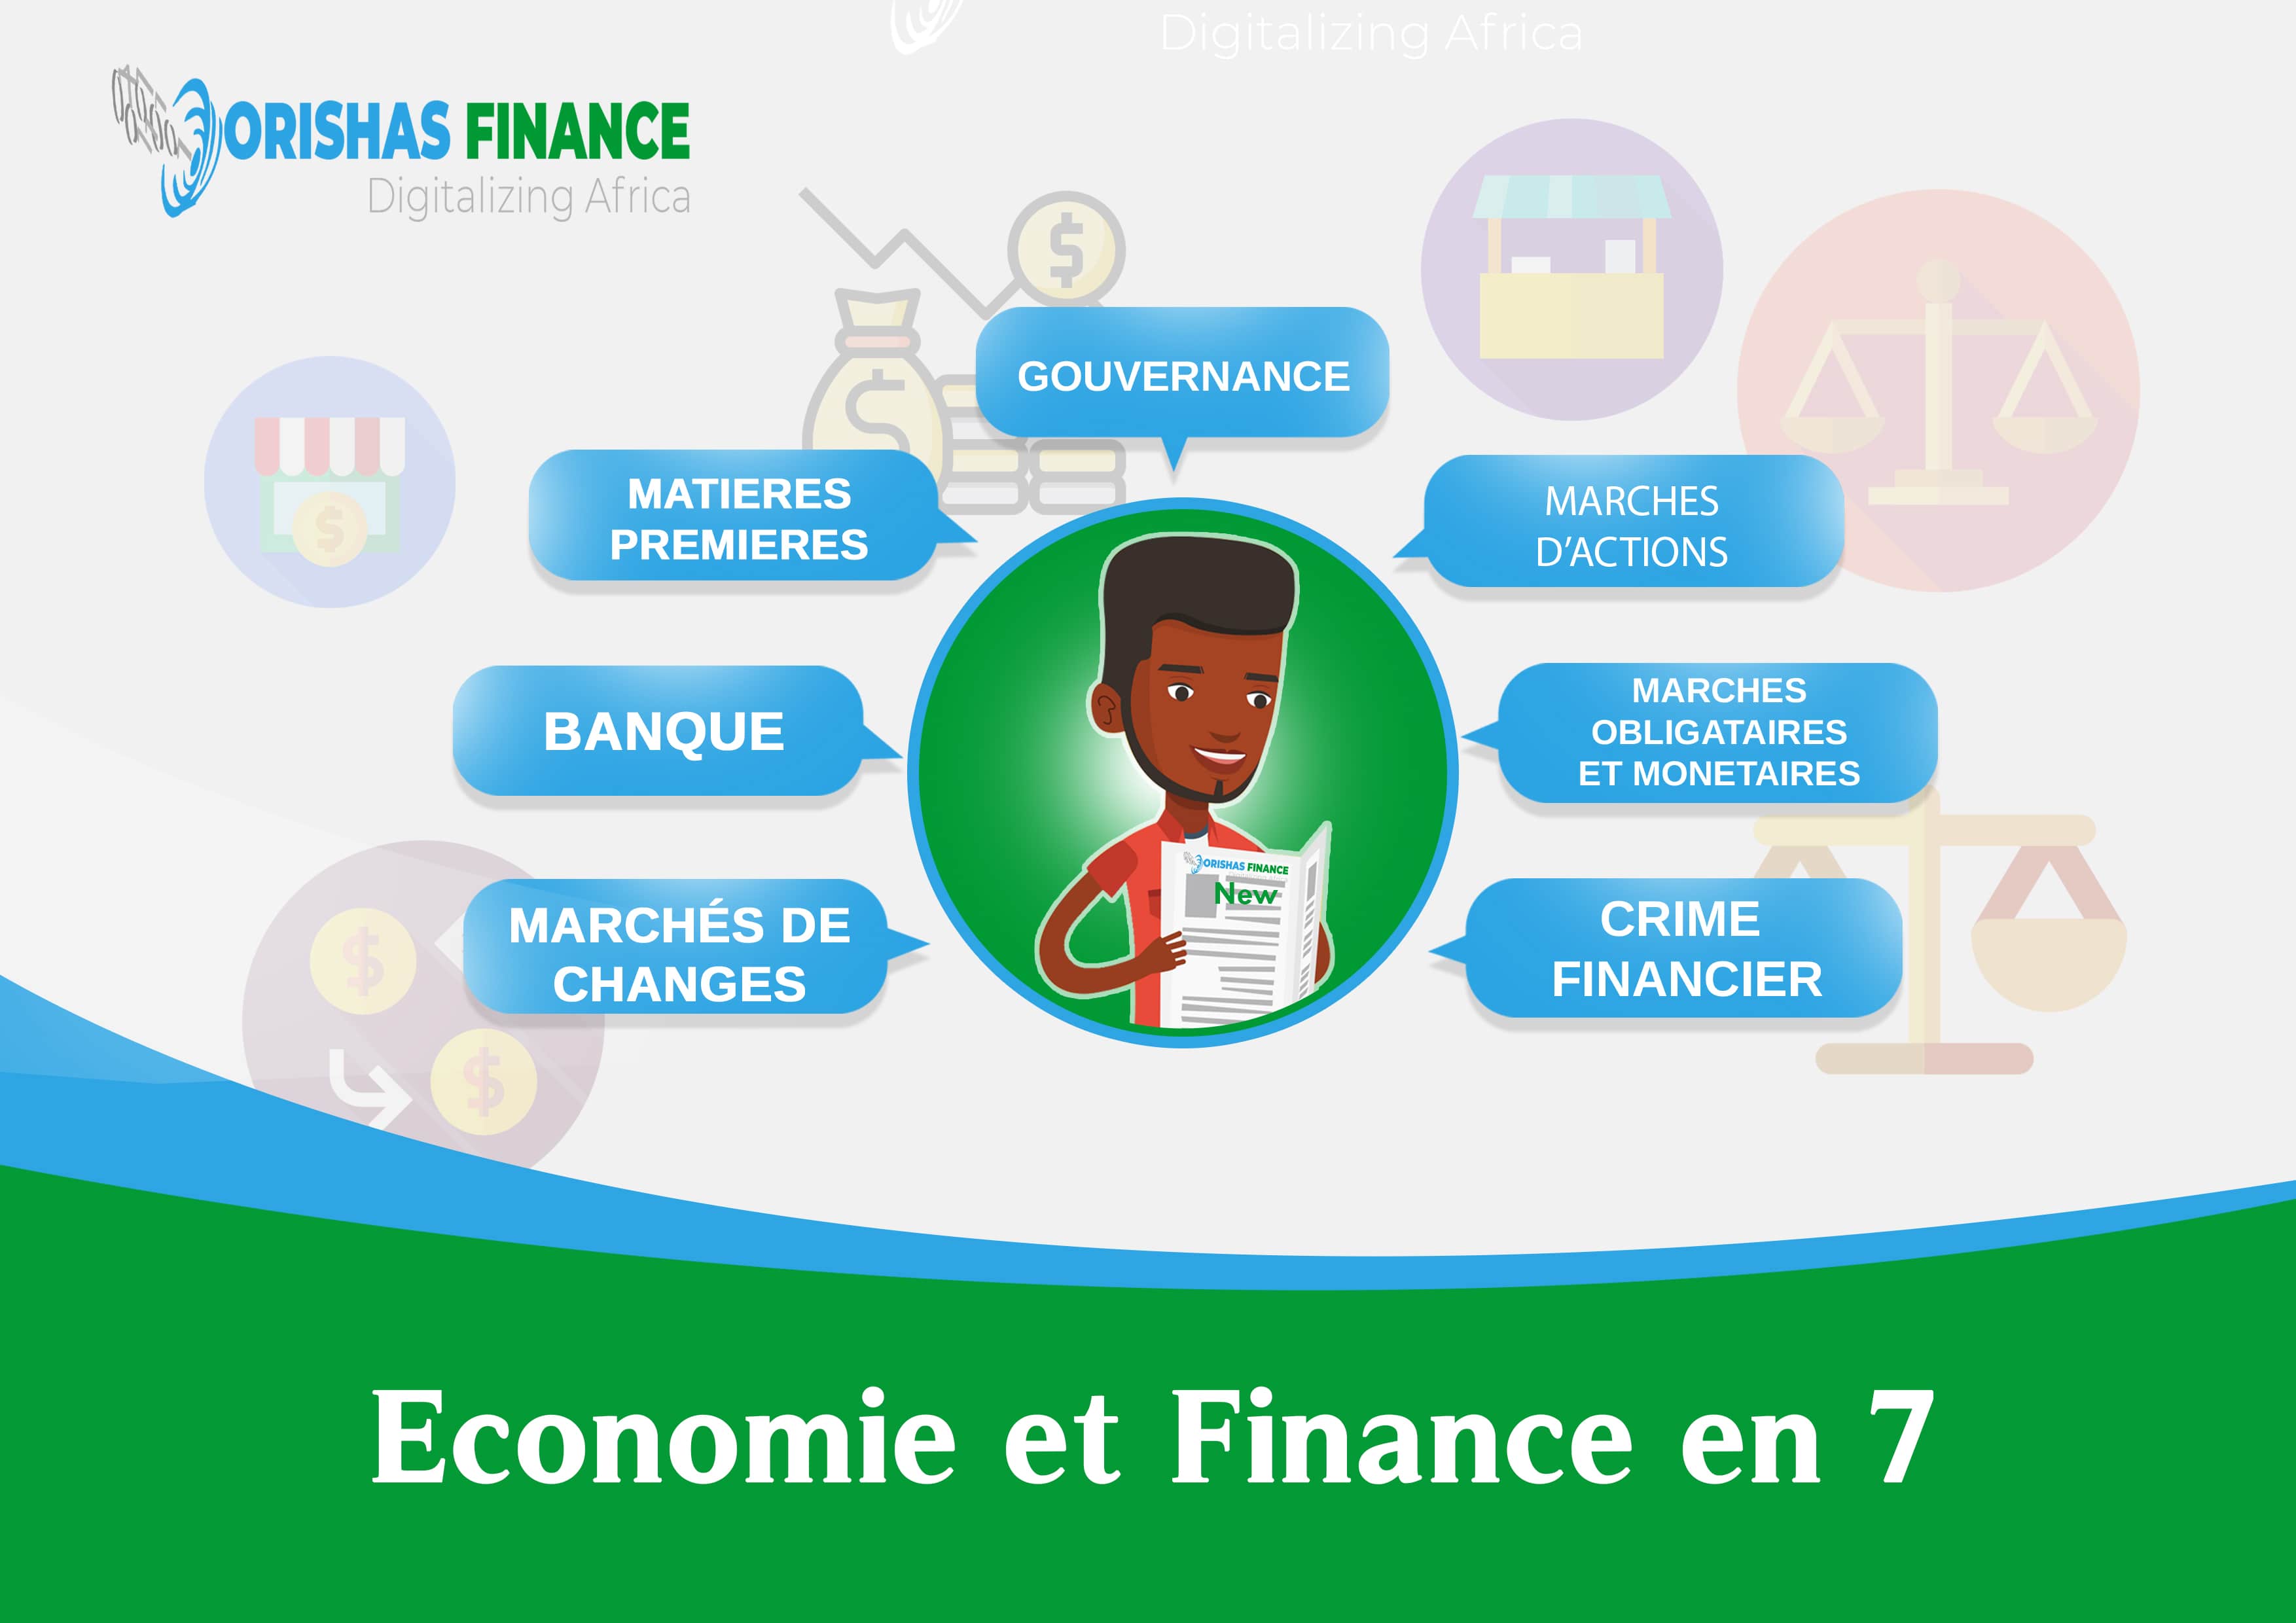  Economy and Finance in 7 from July 26 to 30, 2021 